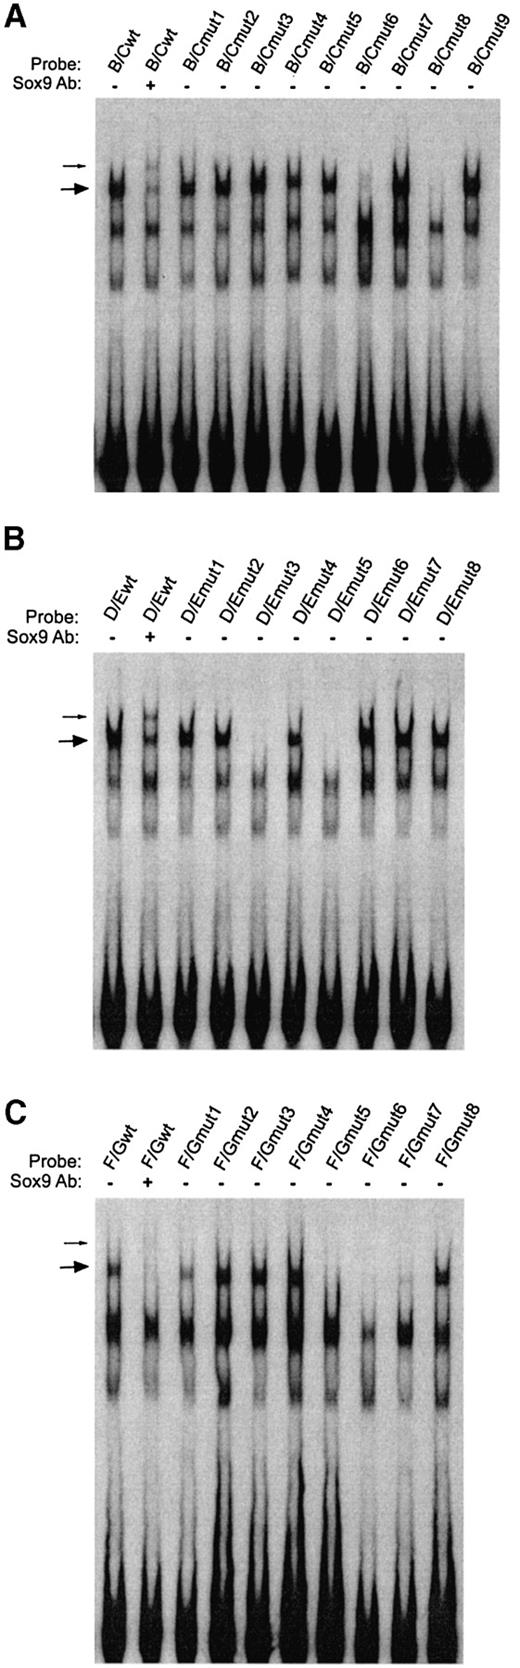 Figure 11. Mutations that reduce transcriptional activity do not necessarily prevent SOX9 binding. The mutant enhancer elements shown in Figures 8–10 were used as probes in EMSA experiments with in vitro transcribed and translated SOX9 to determine whether SOX9 binding correlates with transcriptional activity. Antibody against Sox9 was included with each wild‐type probe to determine which DNA–protein complex contained SOX9. Complexes containing SOX9 are marked by large arrows, and small arrows indicate the supershifted SOX9 antibody complex. ( A ) B/C mutant probe series; ( B ) D/C mutant probe series; ( C ) F/G mutant probe series. 